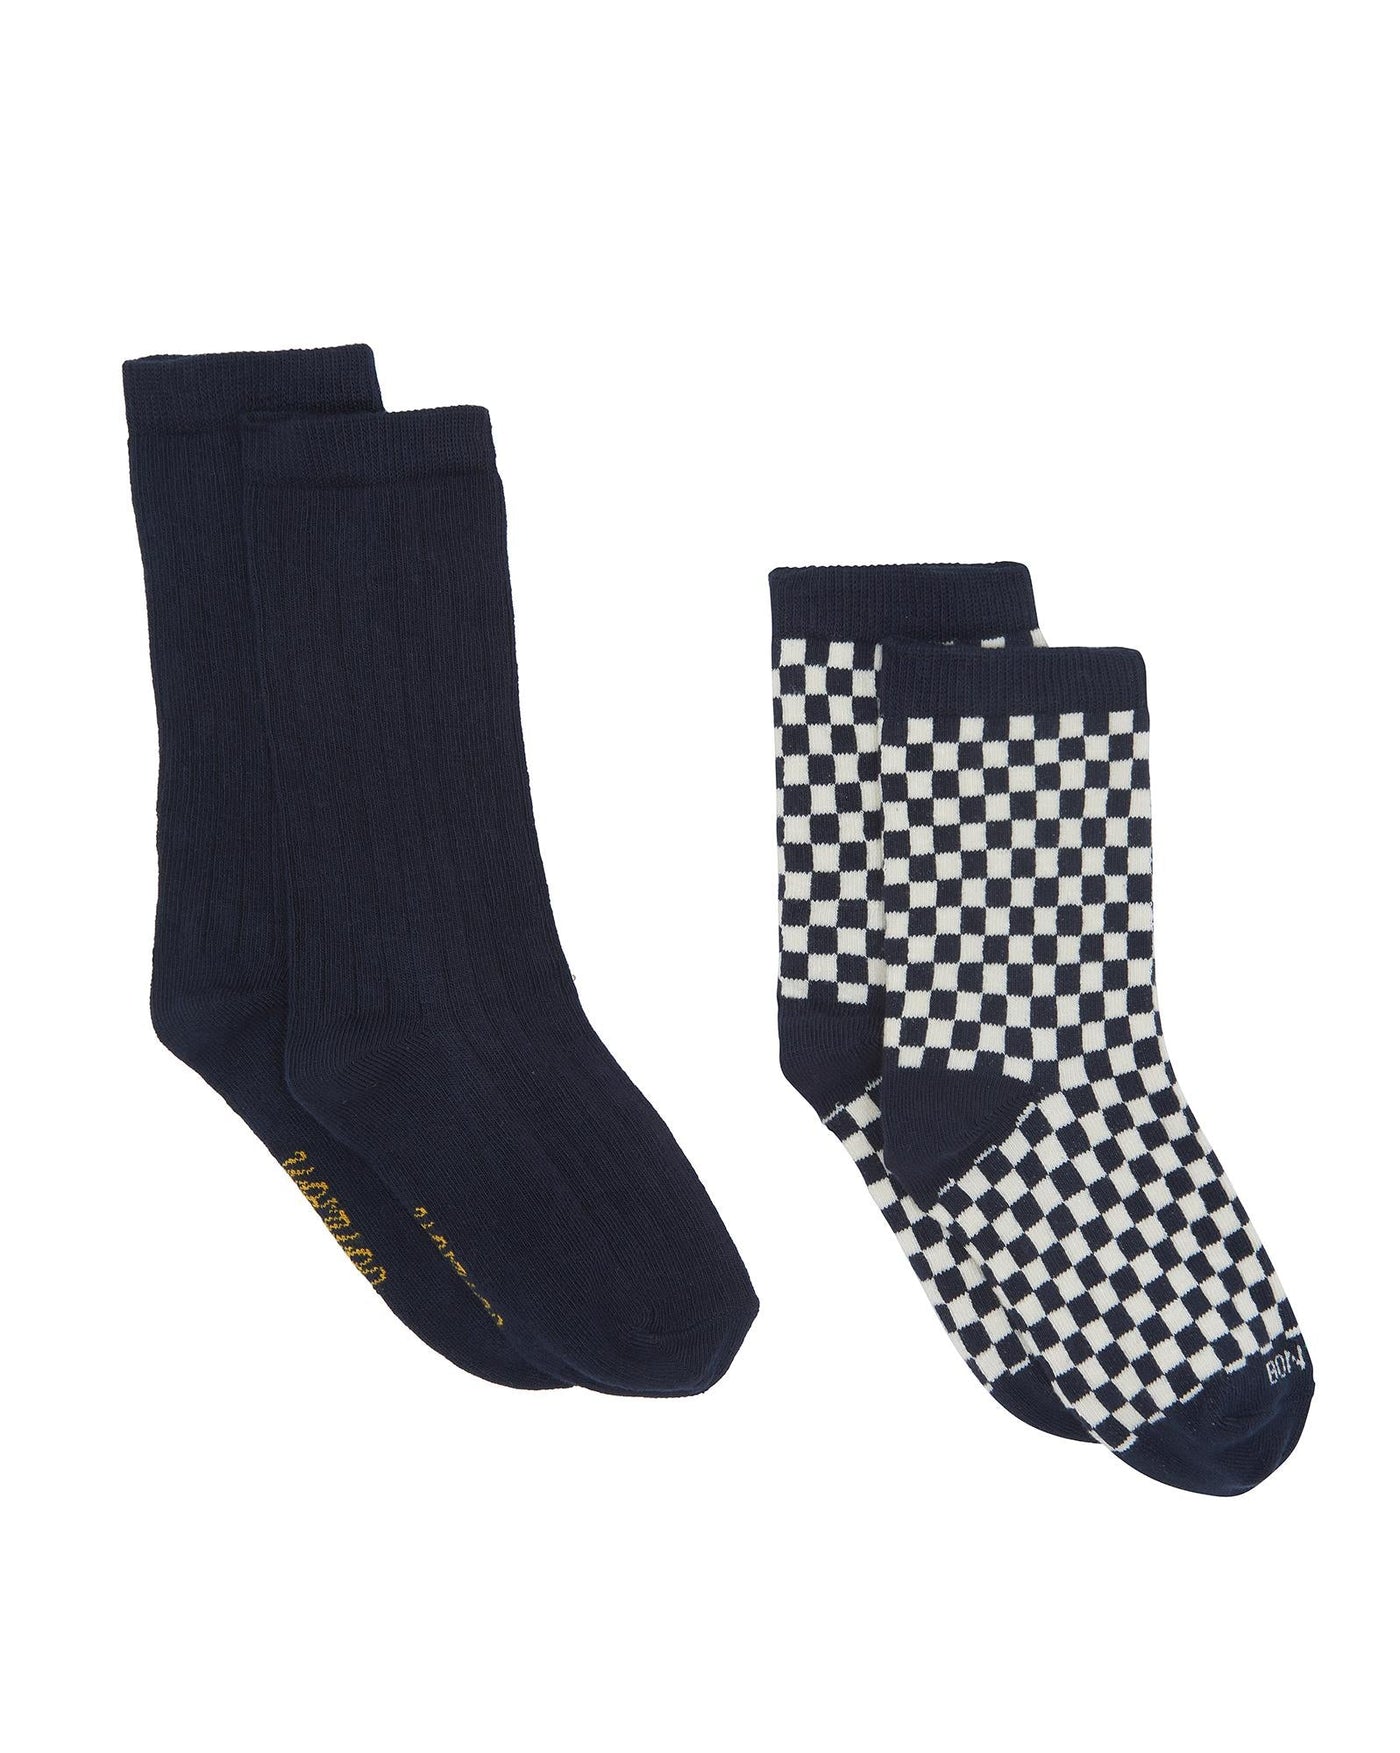 Set of Two Pairs Mixed Socks in Damier Navy